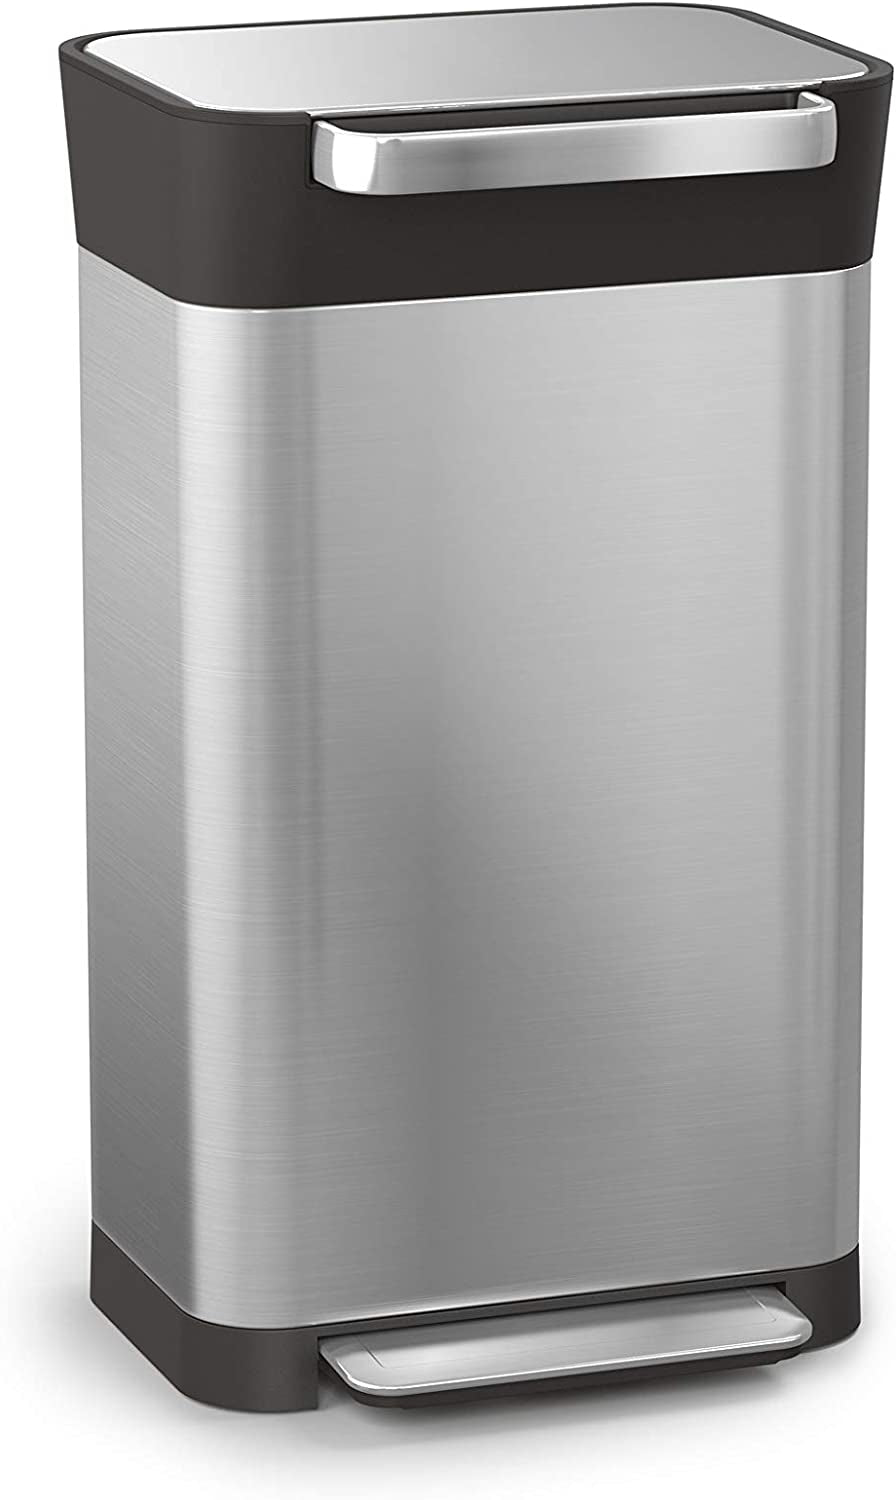 Intelligent Waste Titan Trash Can Compactor with Odor Filter, Holds up to 90L after Compaction, Stainless Steel, 30L